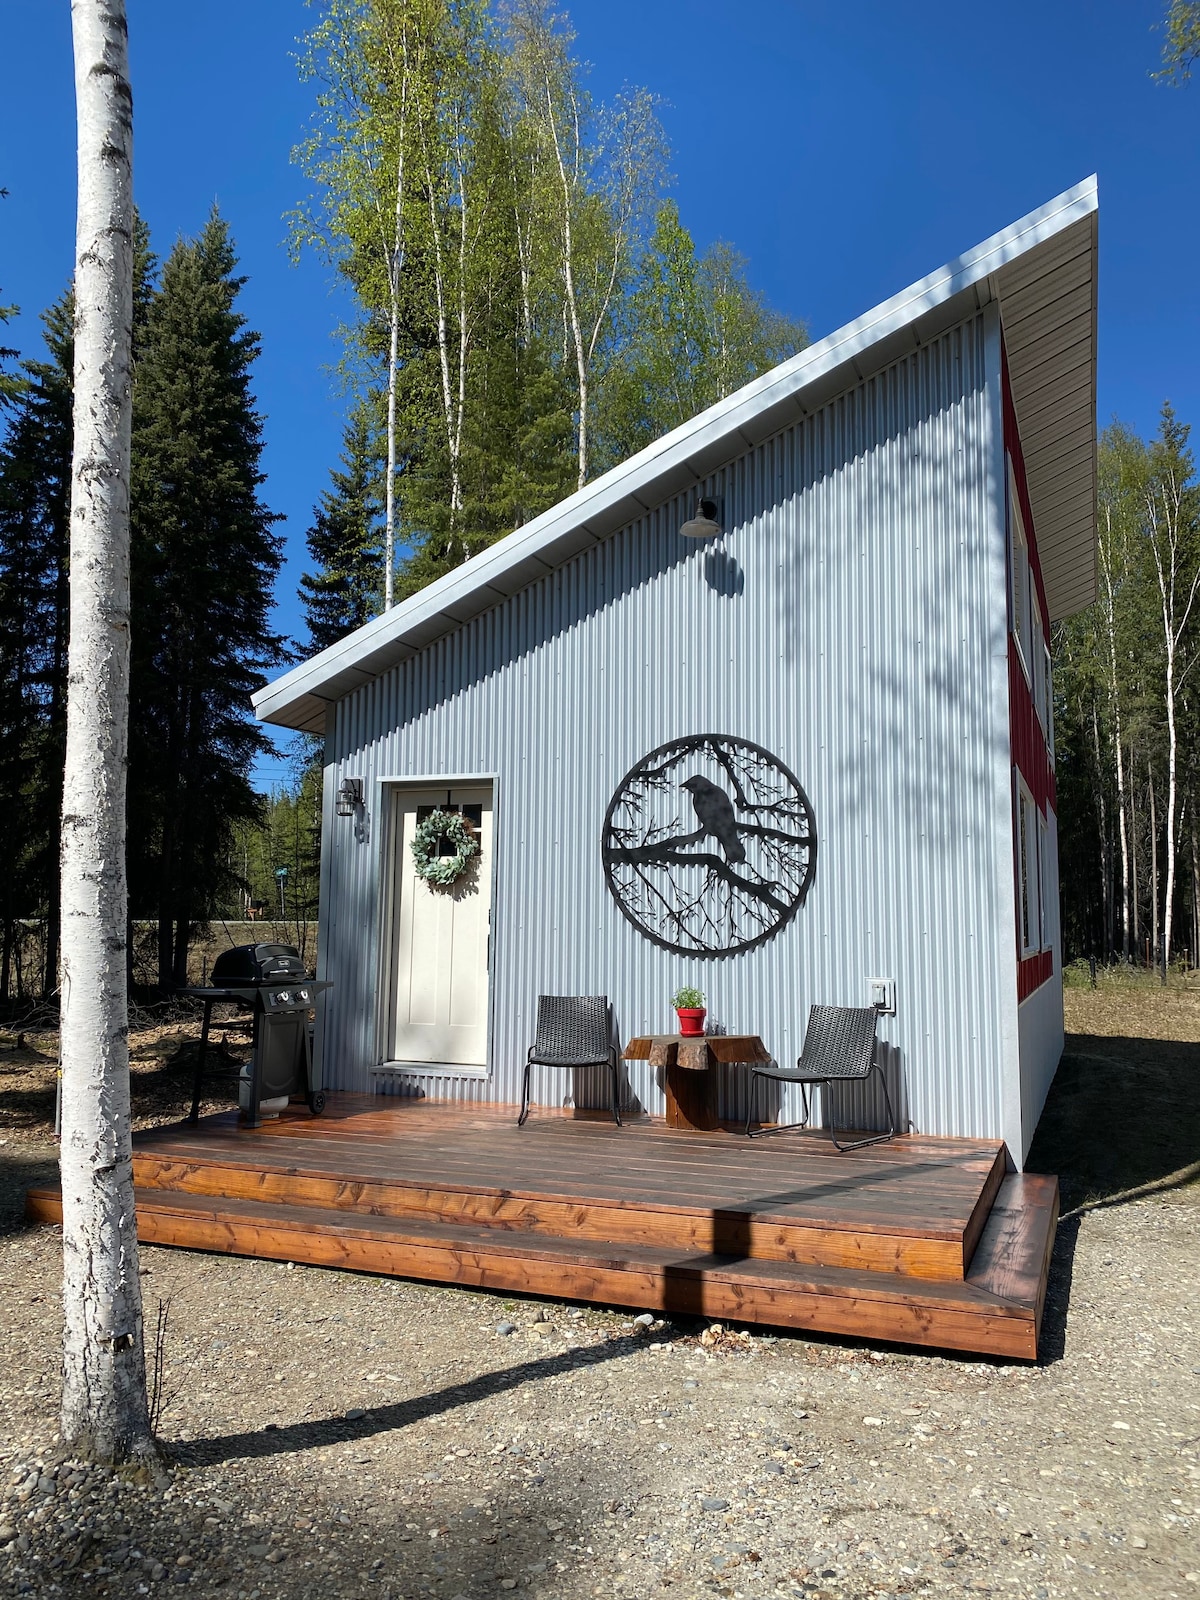 Experience Lakeside Cabin Living in North Pole, AK